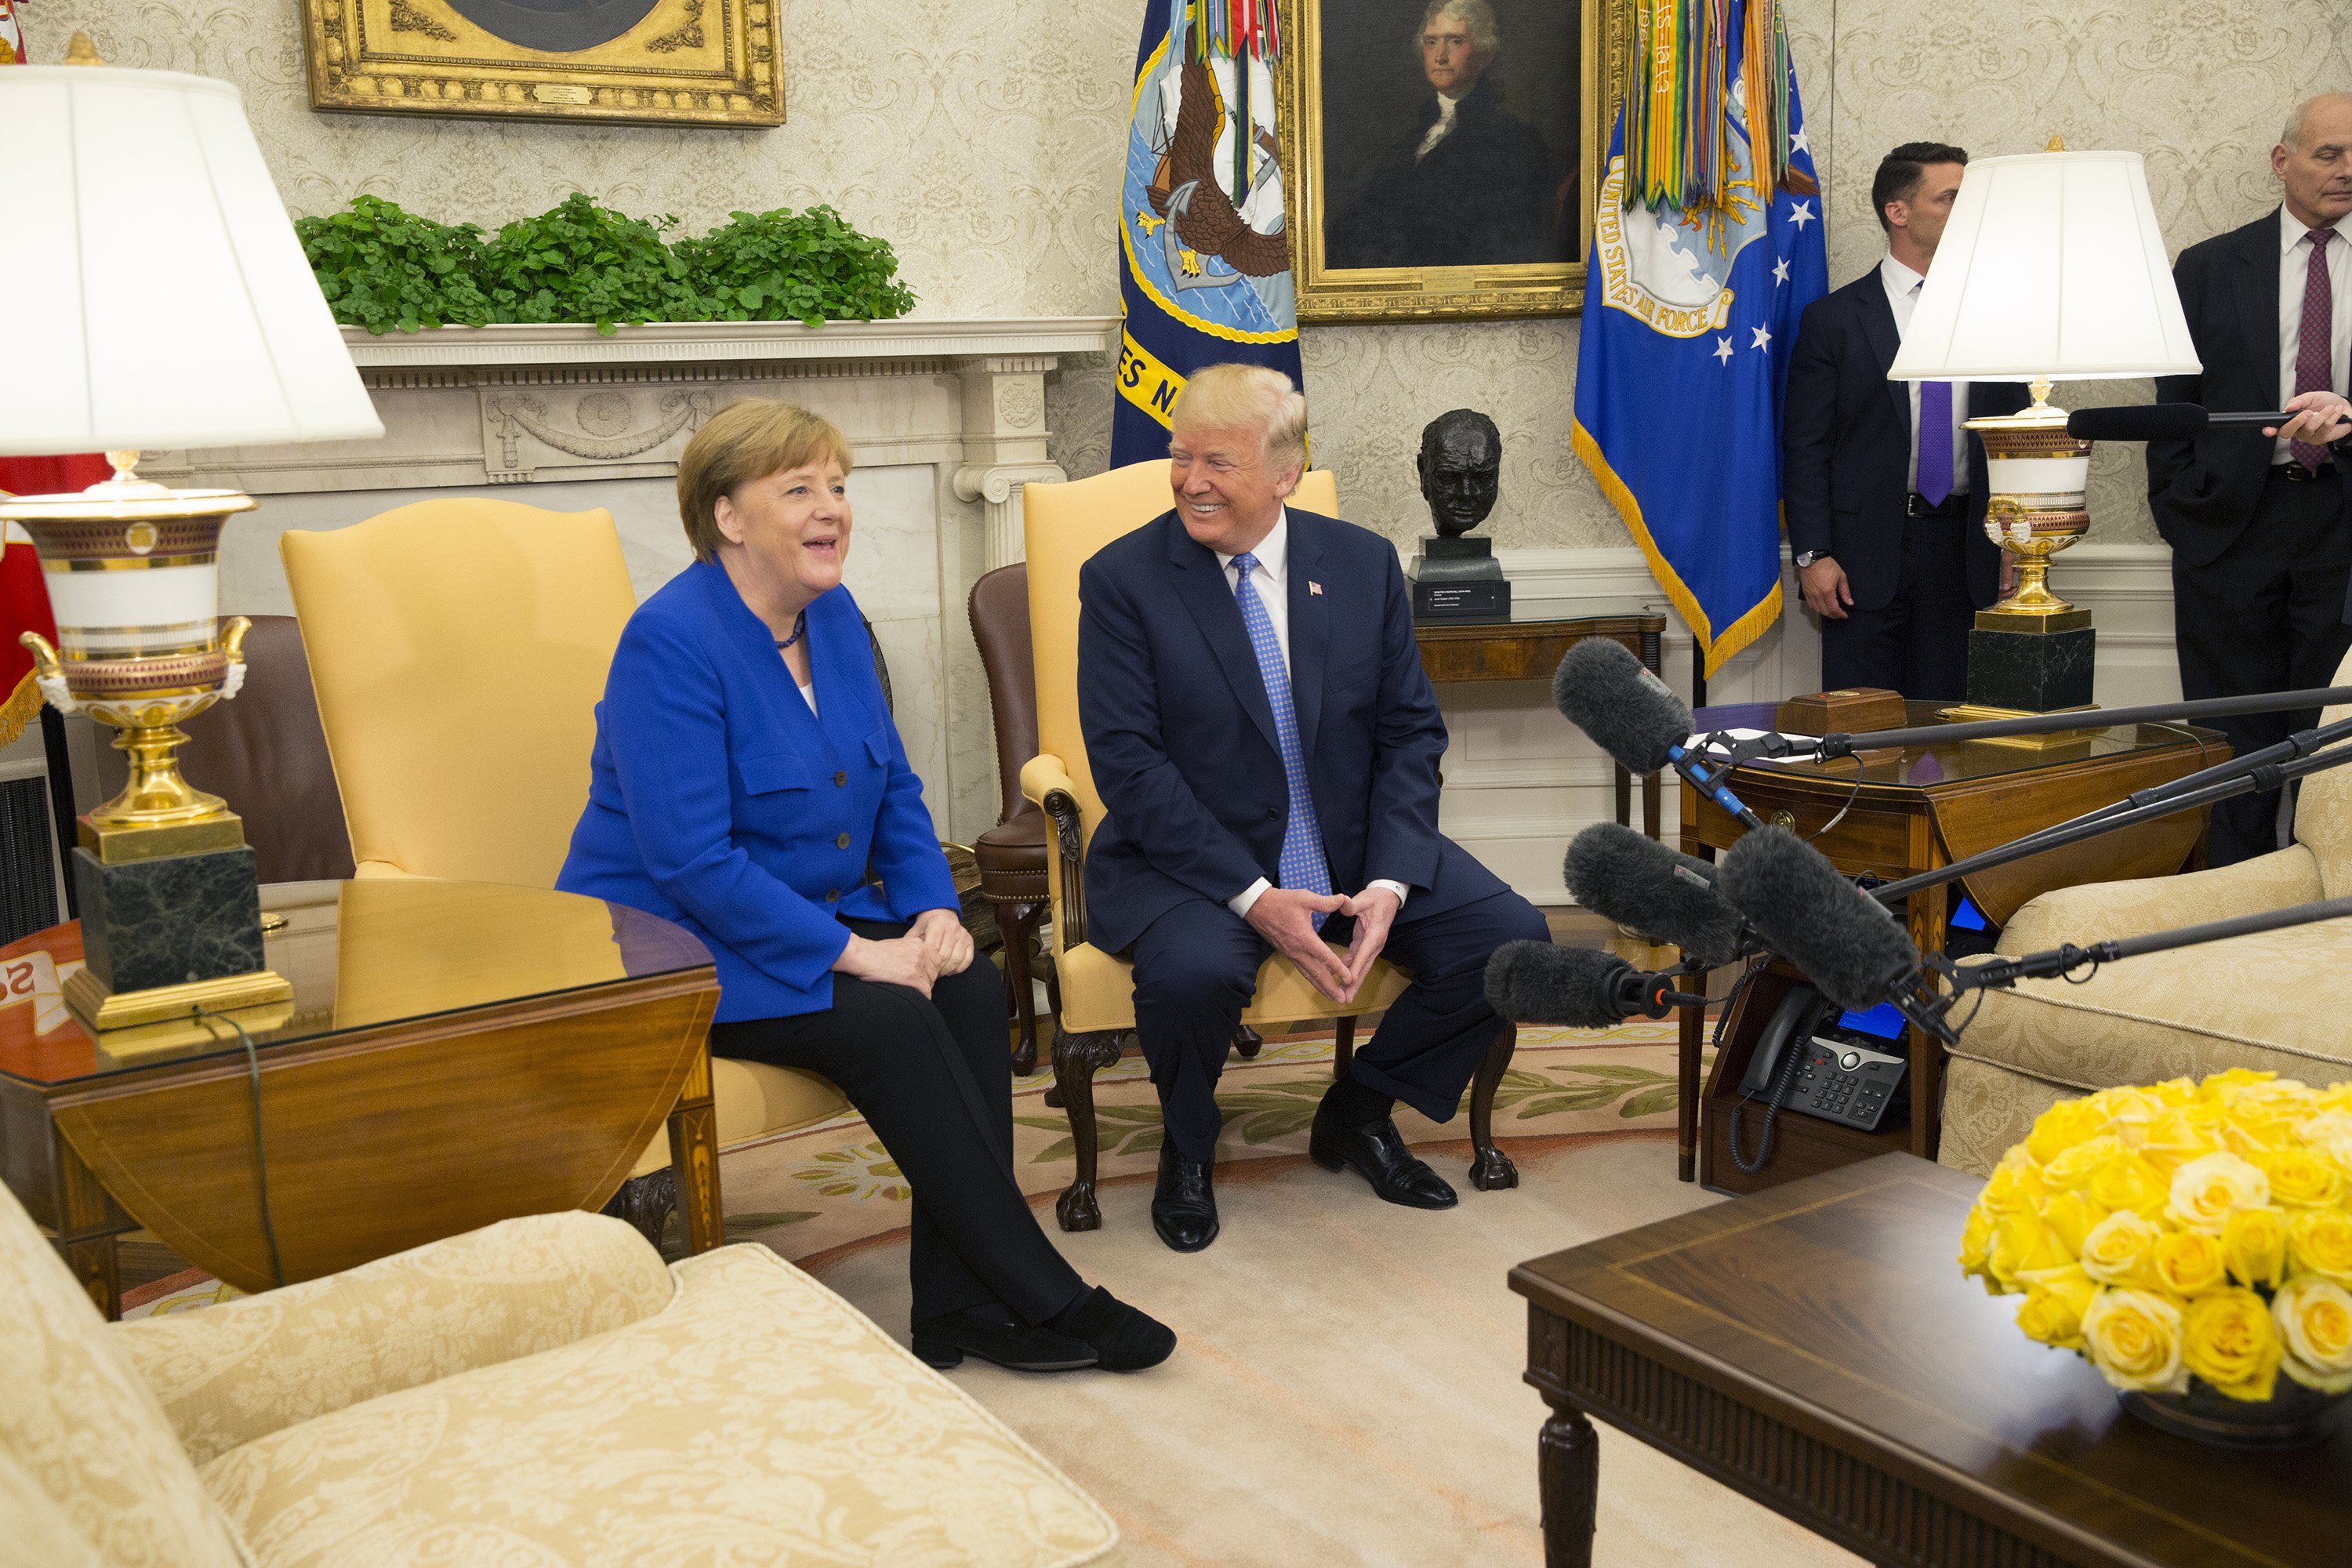 epa06697287 US President Donald J. Trump meets with Chancellor of Germany Angela Merkel at the White House in Washington, DC, USA, 27 April 2018. Merkel is on a one-day working visit to the White House where she and President Trump are expected to discuss trade issues such as proposed US tariffs on European steel and aluminum products, in addition to topics such as NATO.  EPA/CHRIS KLEPONIS / POOL